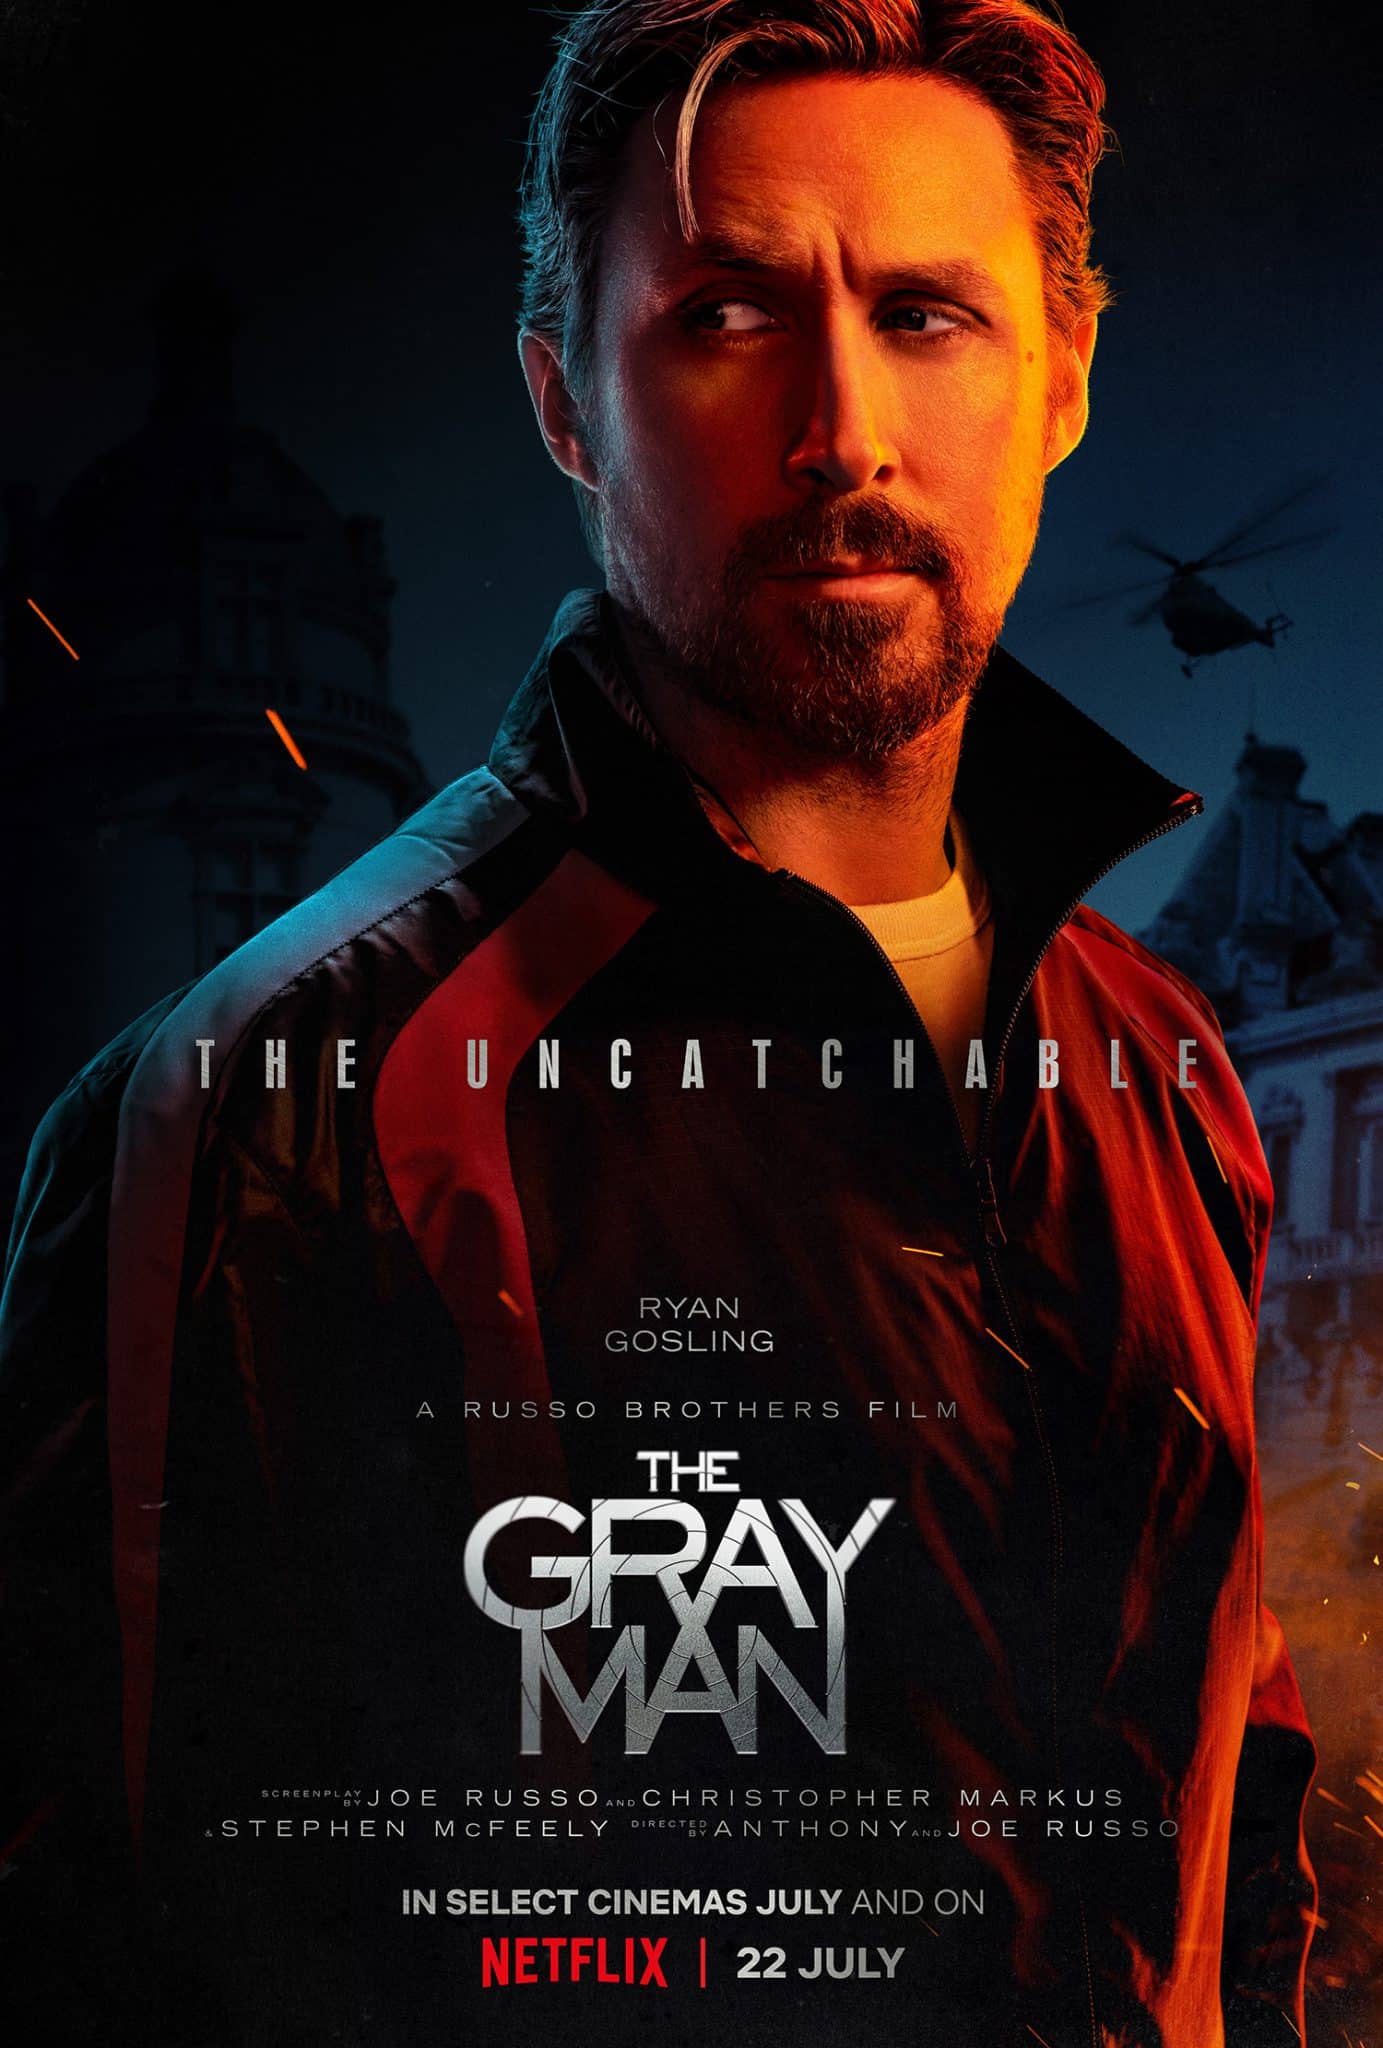 Posters land for Netflix's 'The Gray Man' with Ryan Gosling